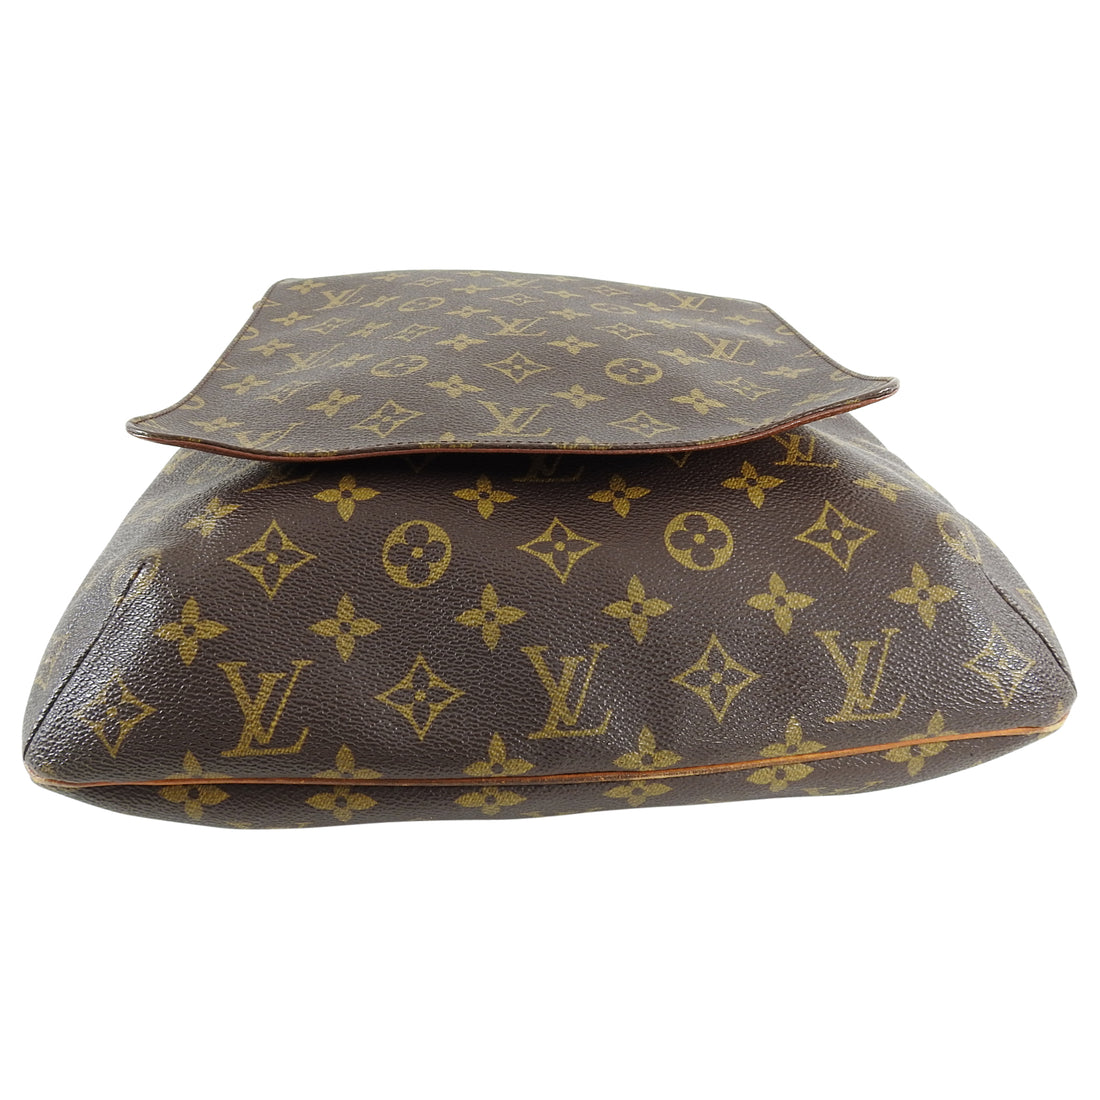 Louis Vuitton musette salsa GM in monogram – Lady Clara's Collection